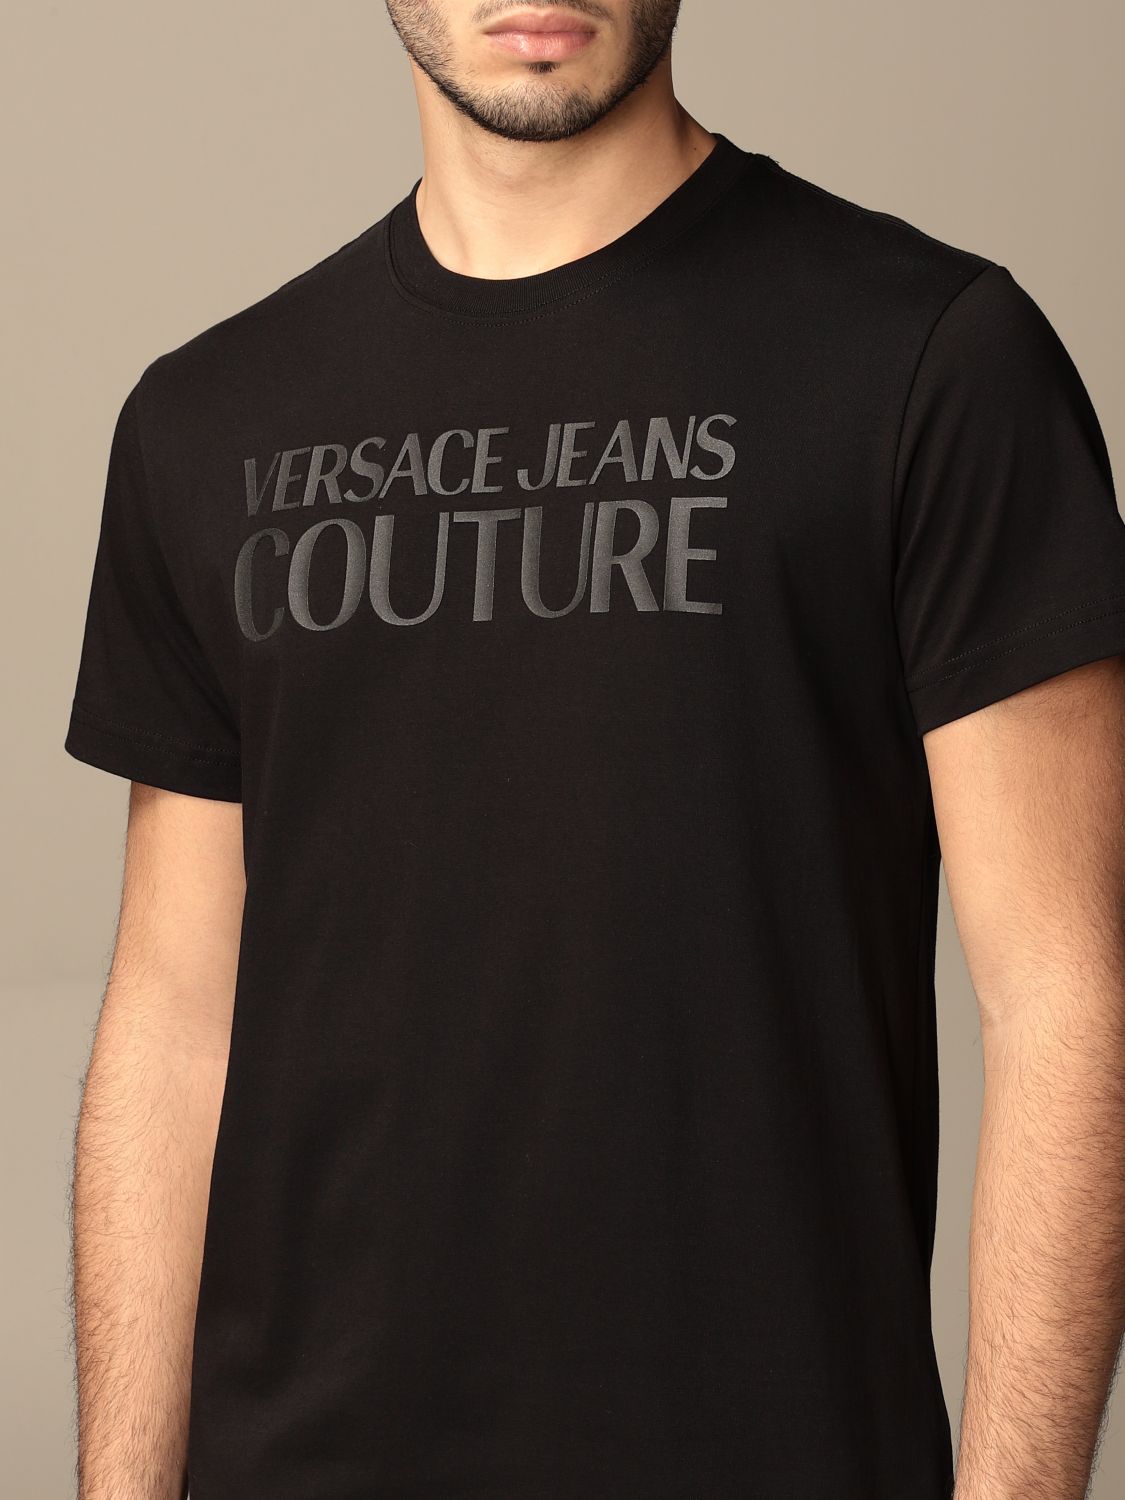 VERSACE JEANS COUTURE：Tシャツ メンズ - ブラック | GIGLIO.COMオンラインのVersace Jeans